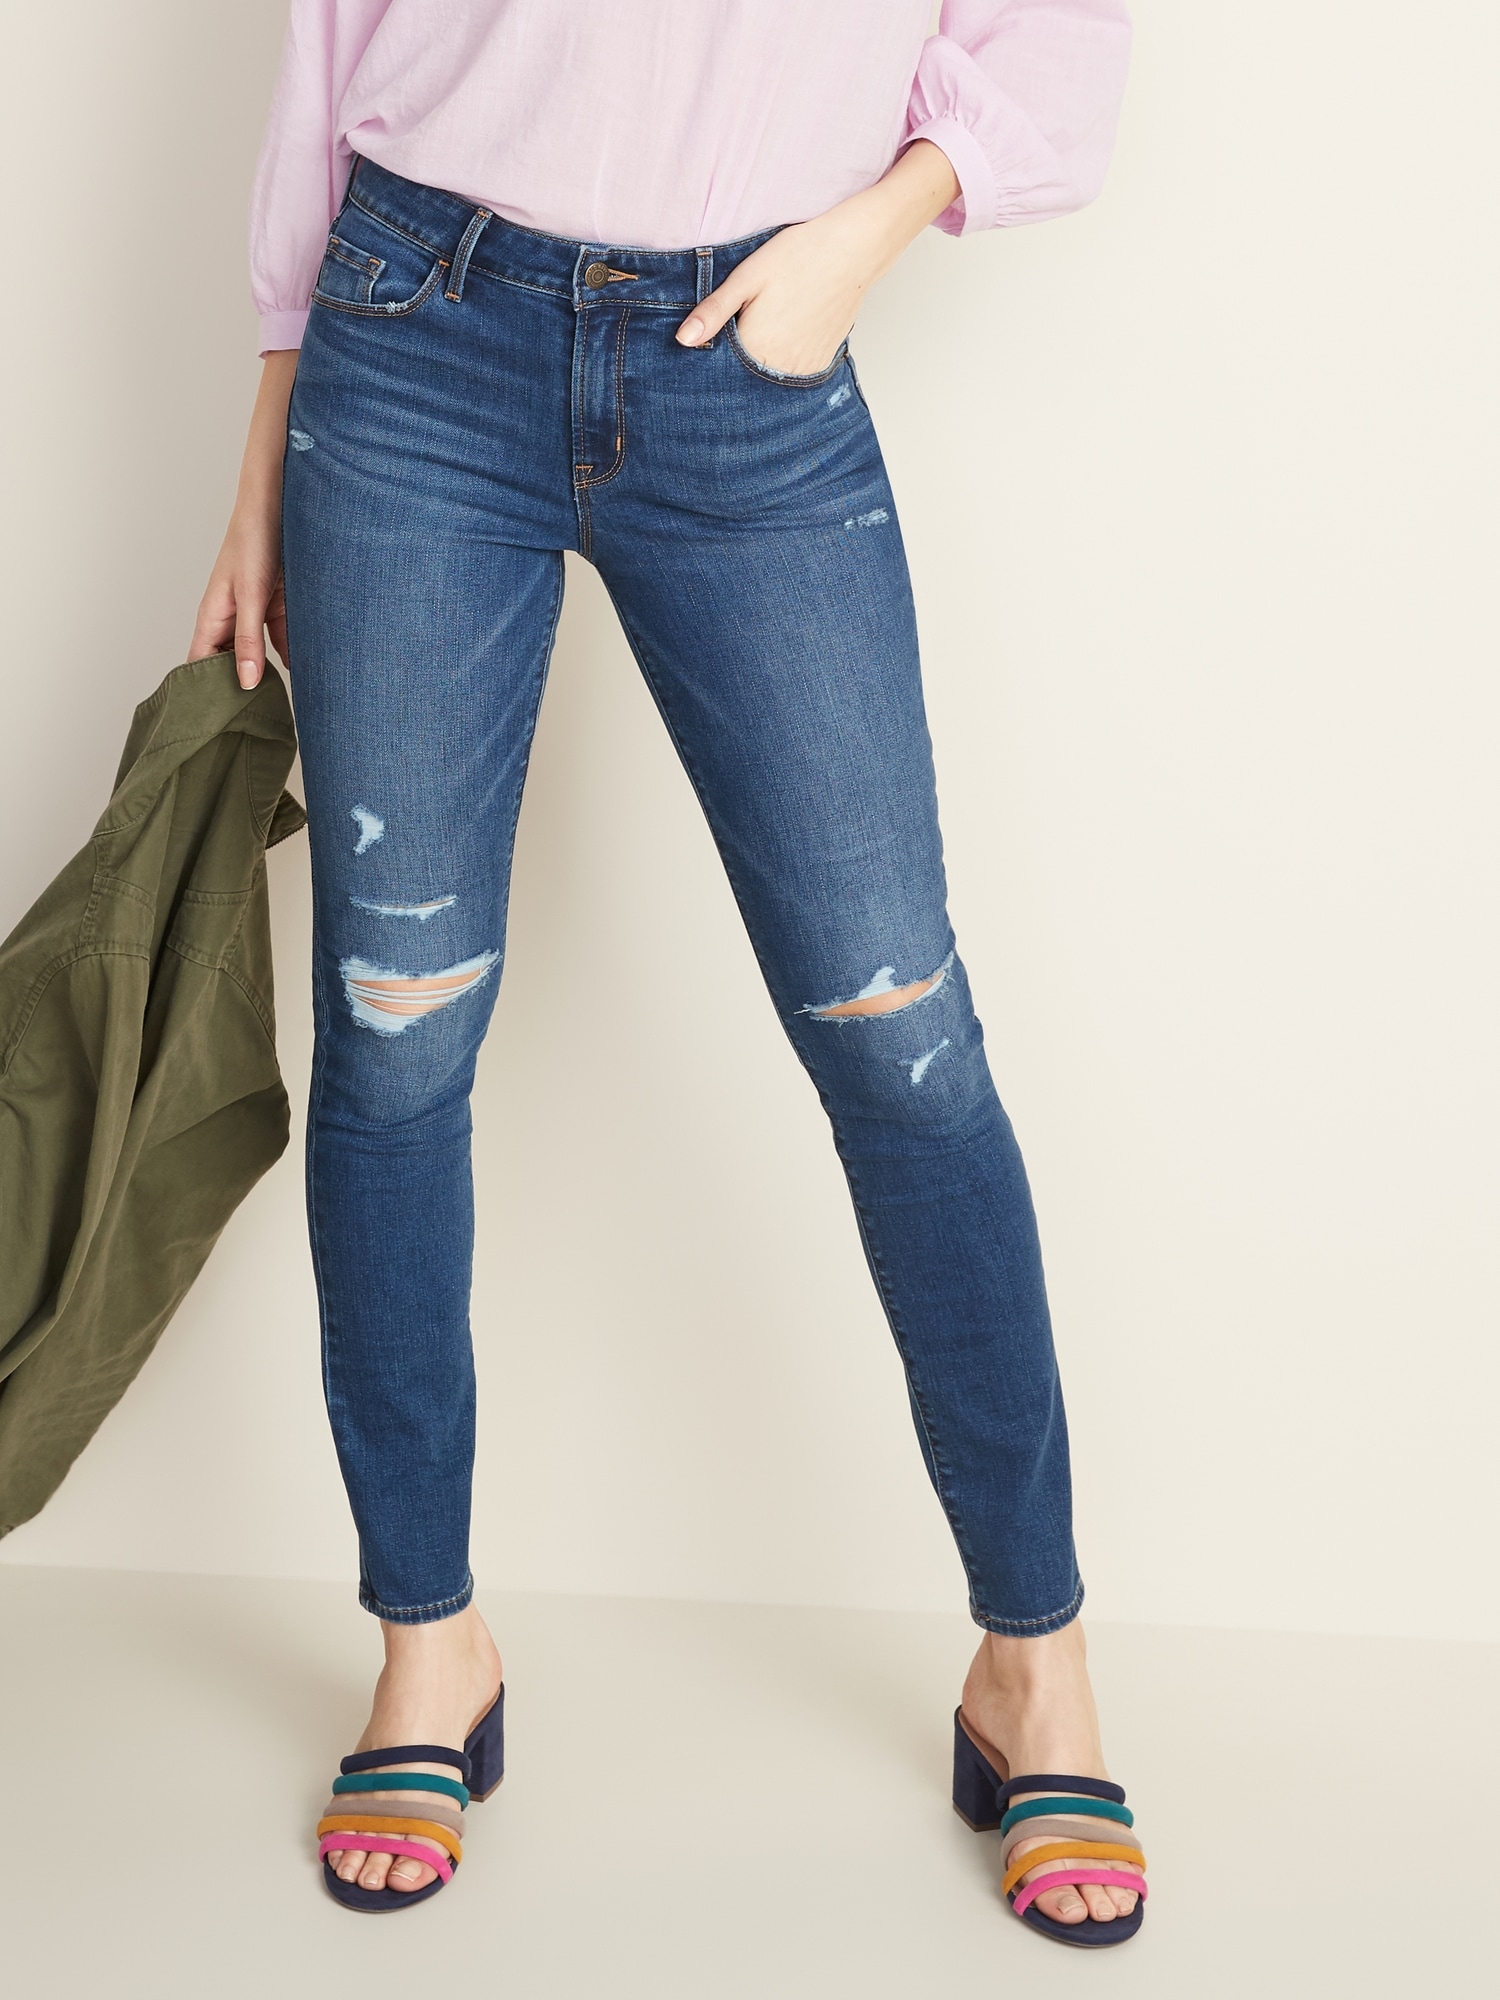 old navy mid rise curvy skinny jeans